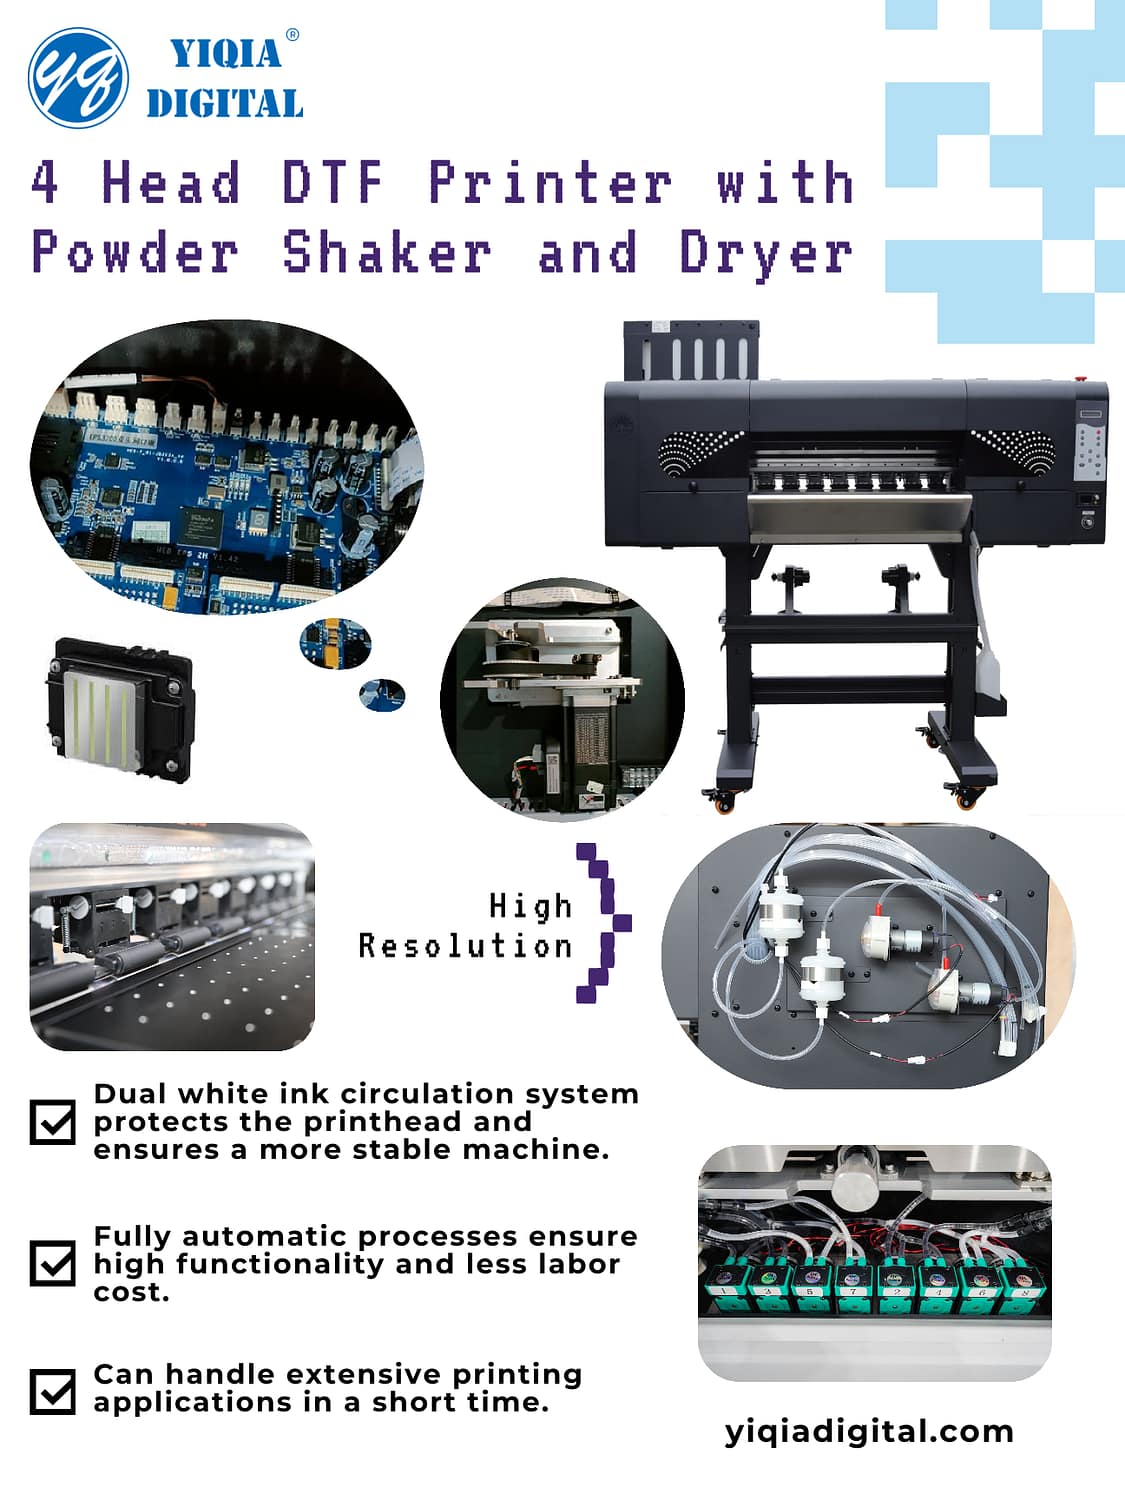 4-HEAD-DTF-PRINTER-WITH-POWDER-SHAKER-AND-DRYER